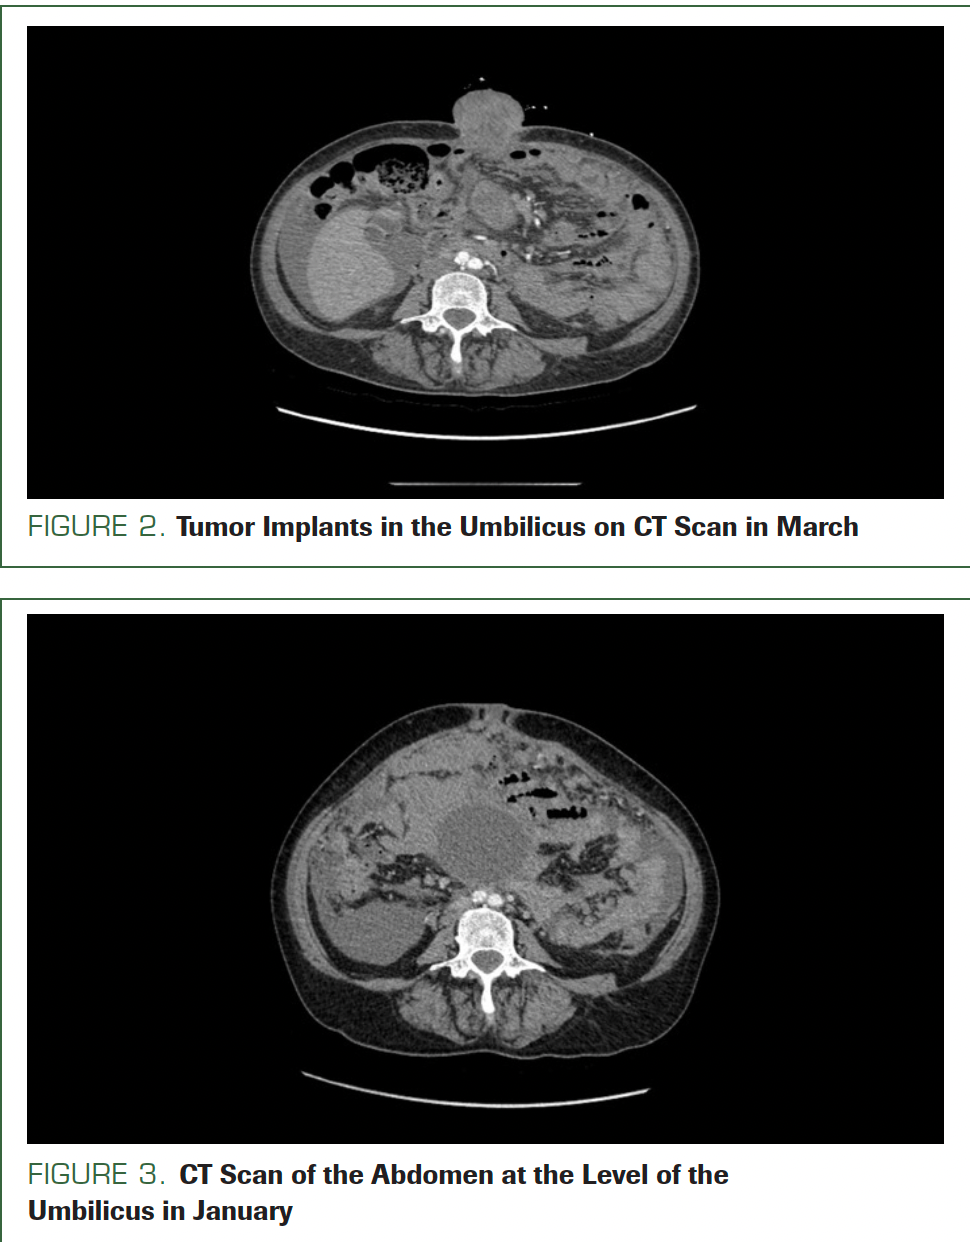 FIGURE 2. Tumor Implants in the Umbilicus on CT Scan in March

FIGURE 3. CT Scan of the Abdomen at the Level of the Umbilicus in January